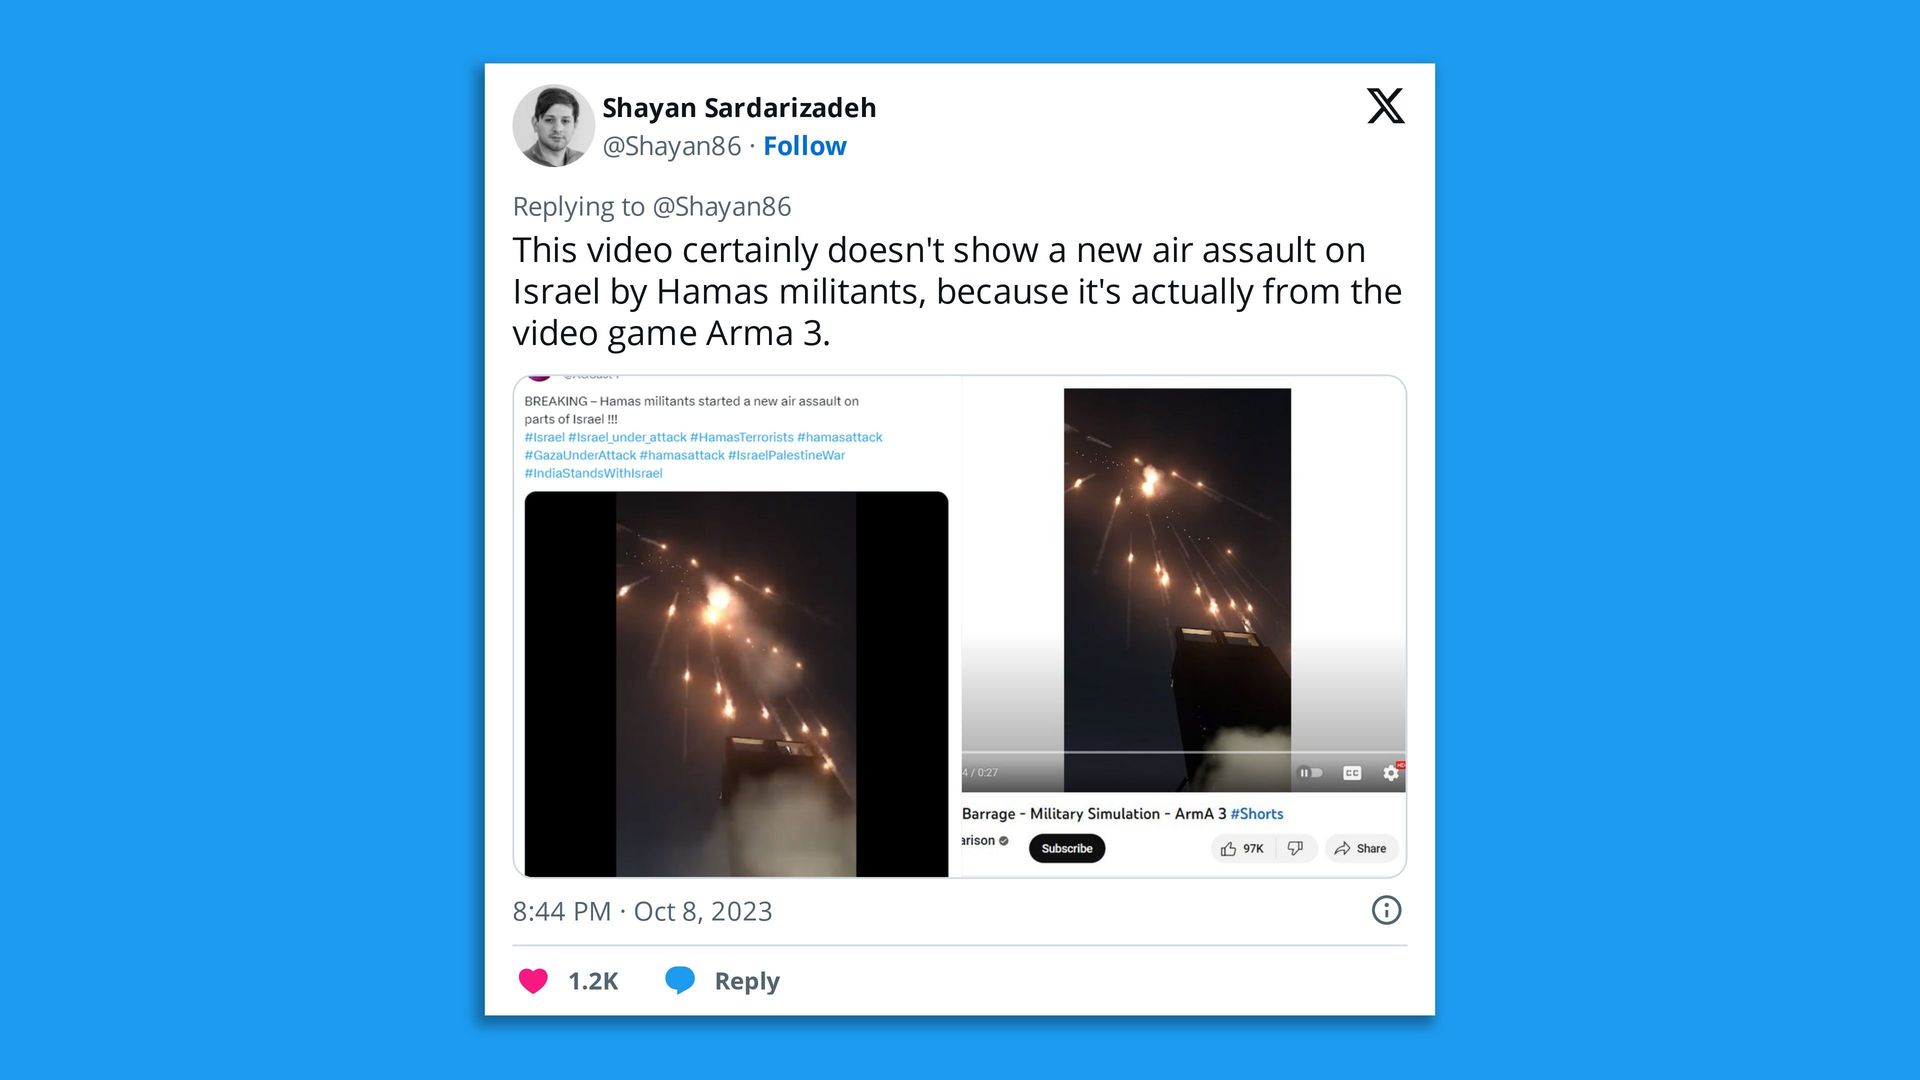 Screenshot of a tweet showing a nighttime bombardment of a building that was presented as footage from the Israeli-Palestinian conflict, next to an image of a video game that was the actual source